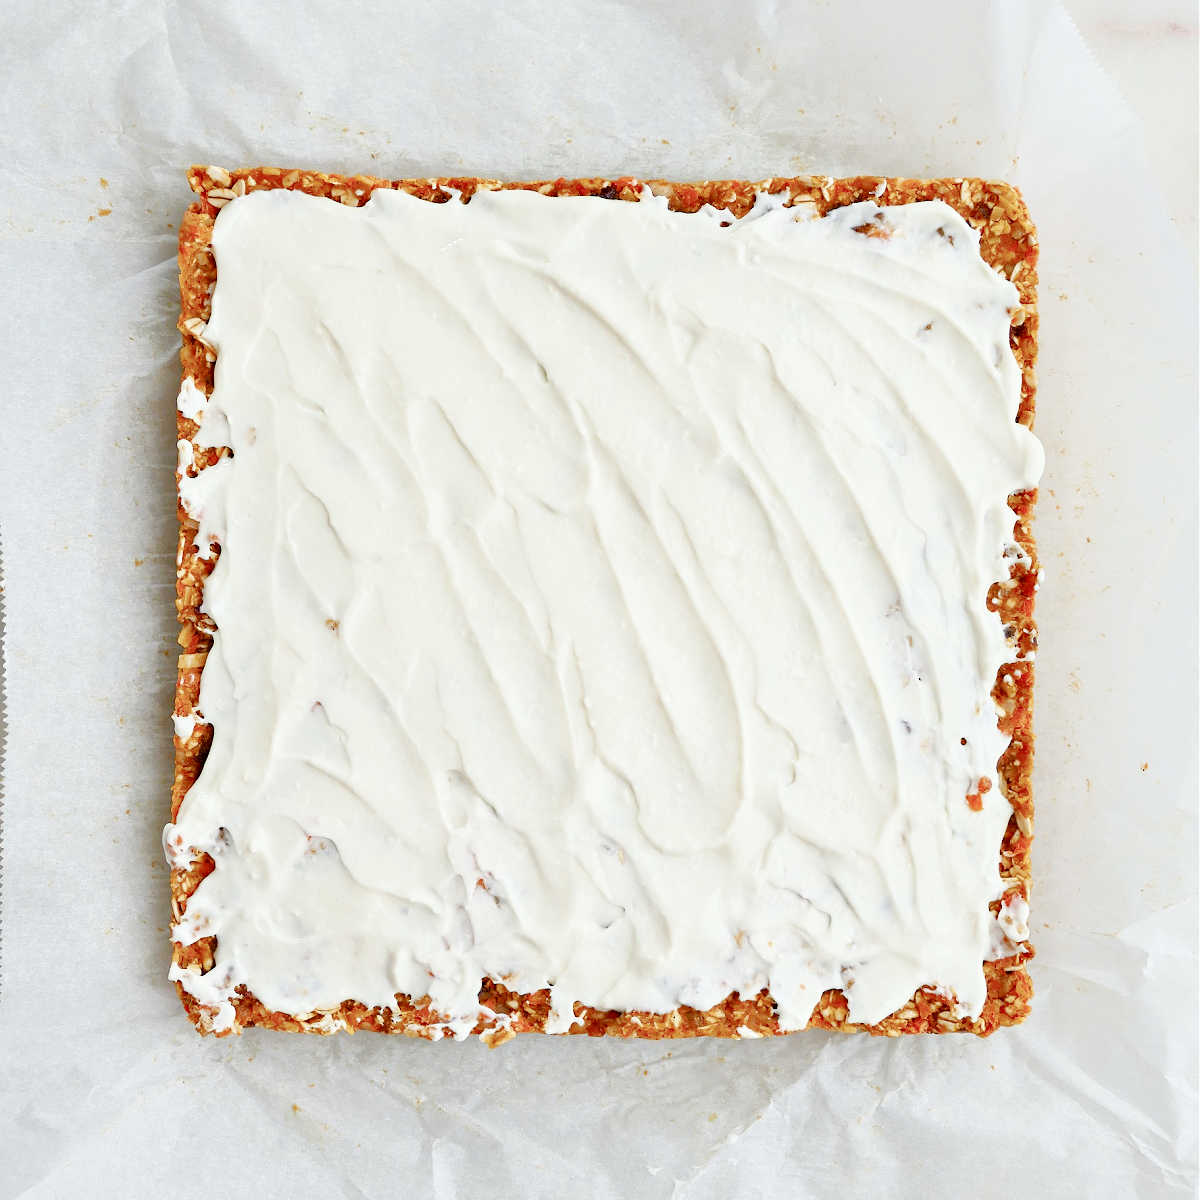 Healthy no bake carrot cake bars topped with frosting before slicing on parchment paper.